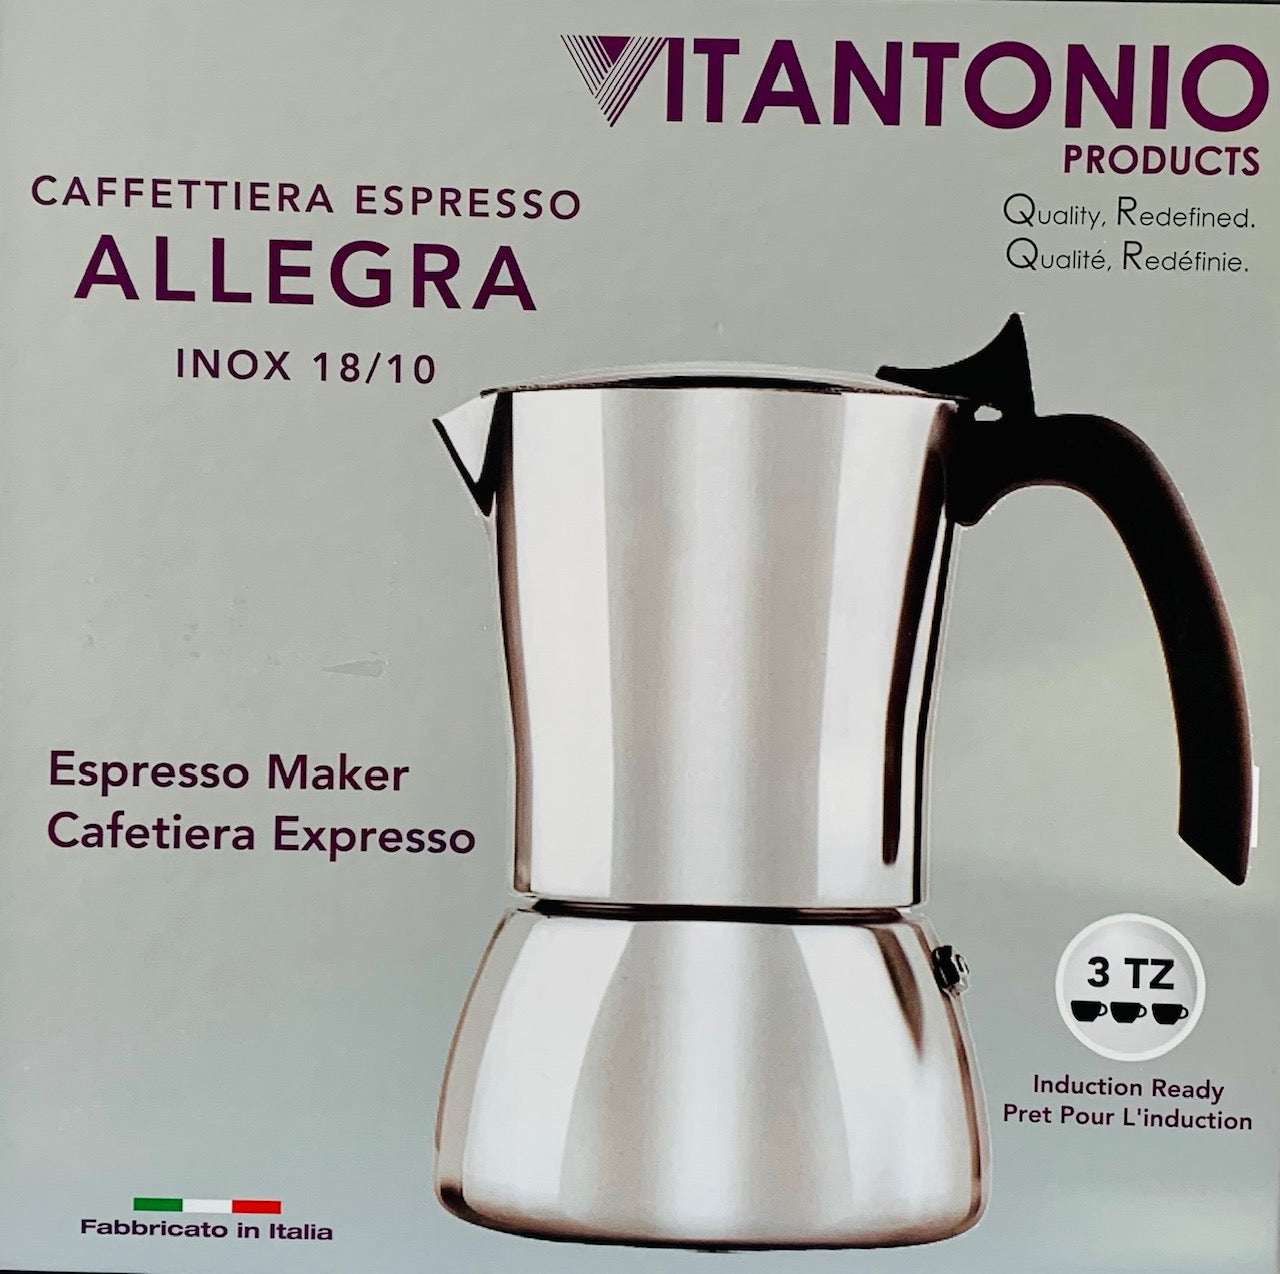 Espresso Maker 3 cups Vitantonio Allegra collection 18/10 Stainless Steel, Made in Italy - Royal Gift